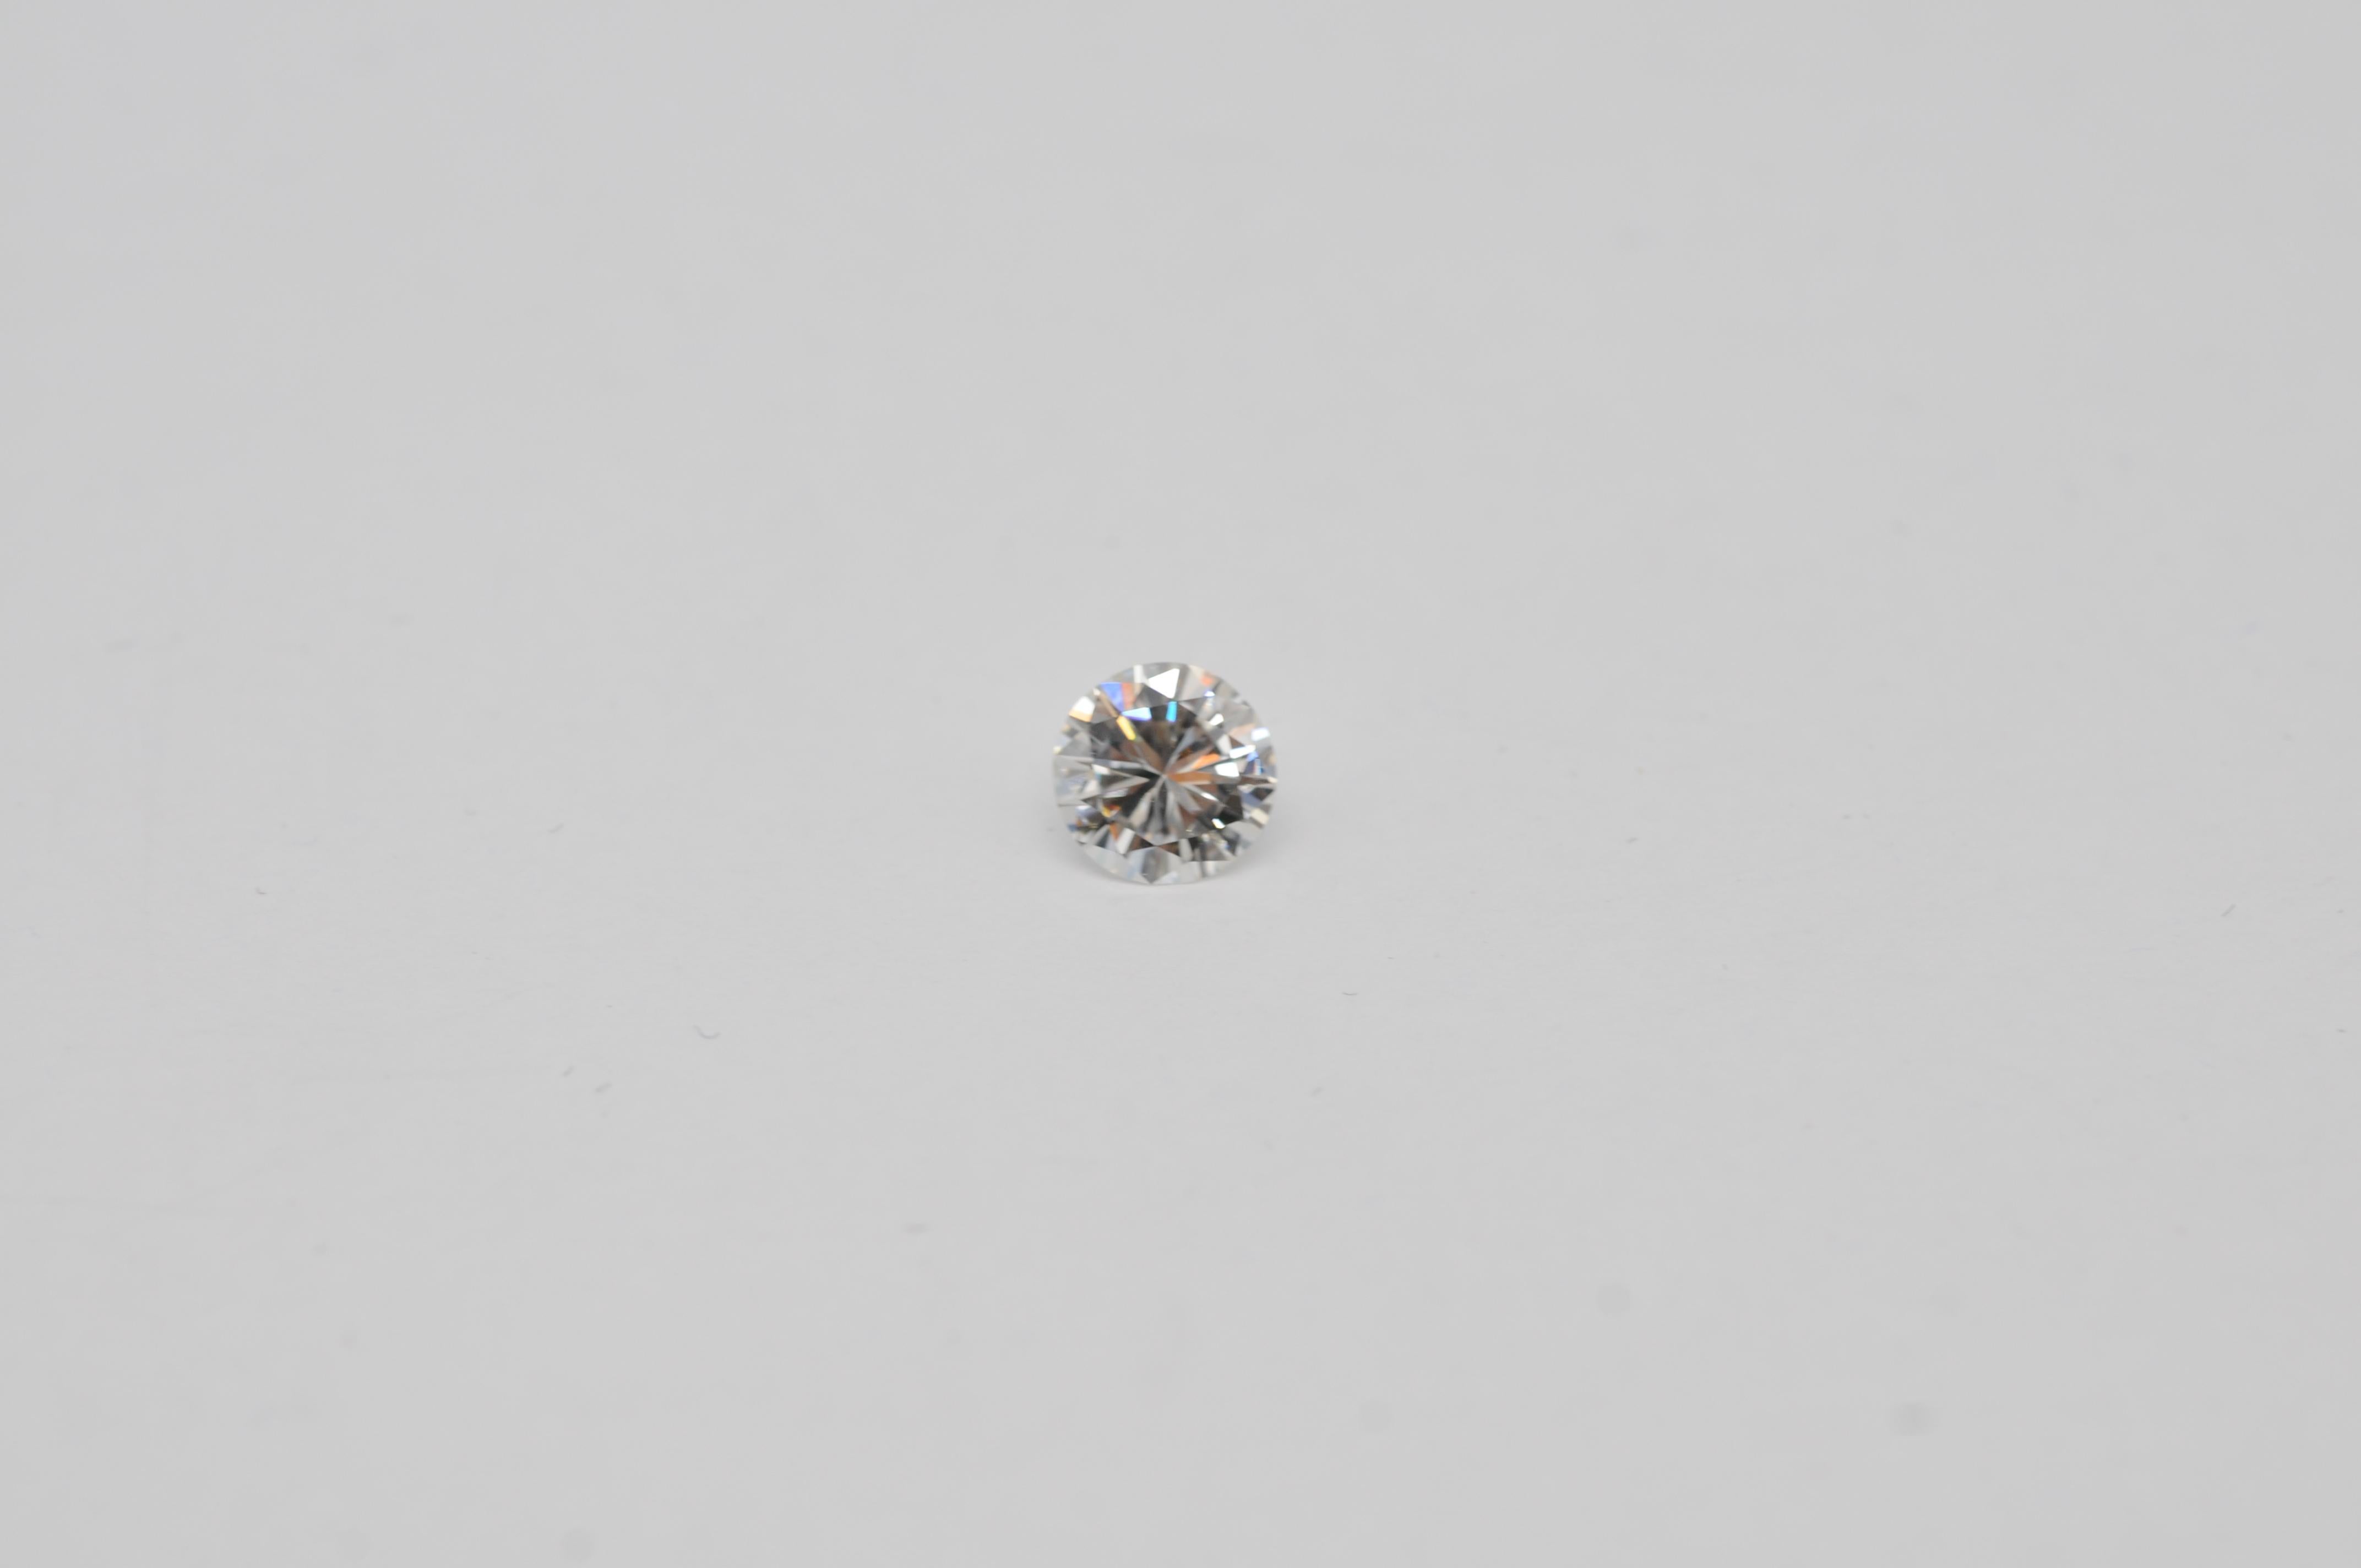 Diamond Details:

Carat: 0.57
Clarity: VVS2 (Very Very Slightly Included, with minute inclusions only visible under 10x magnification)
Color: E (Exceptional White)
Cut: Good
Shape: Brilliant Cut
Additional Characteristics:

Proportions: